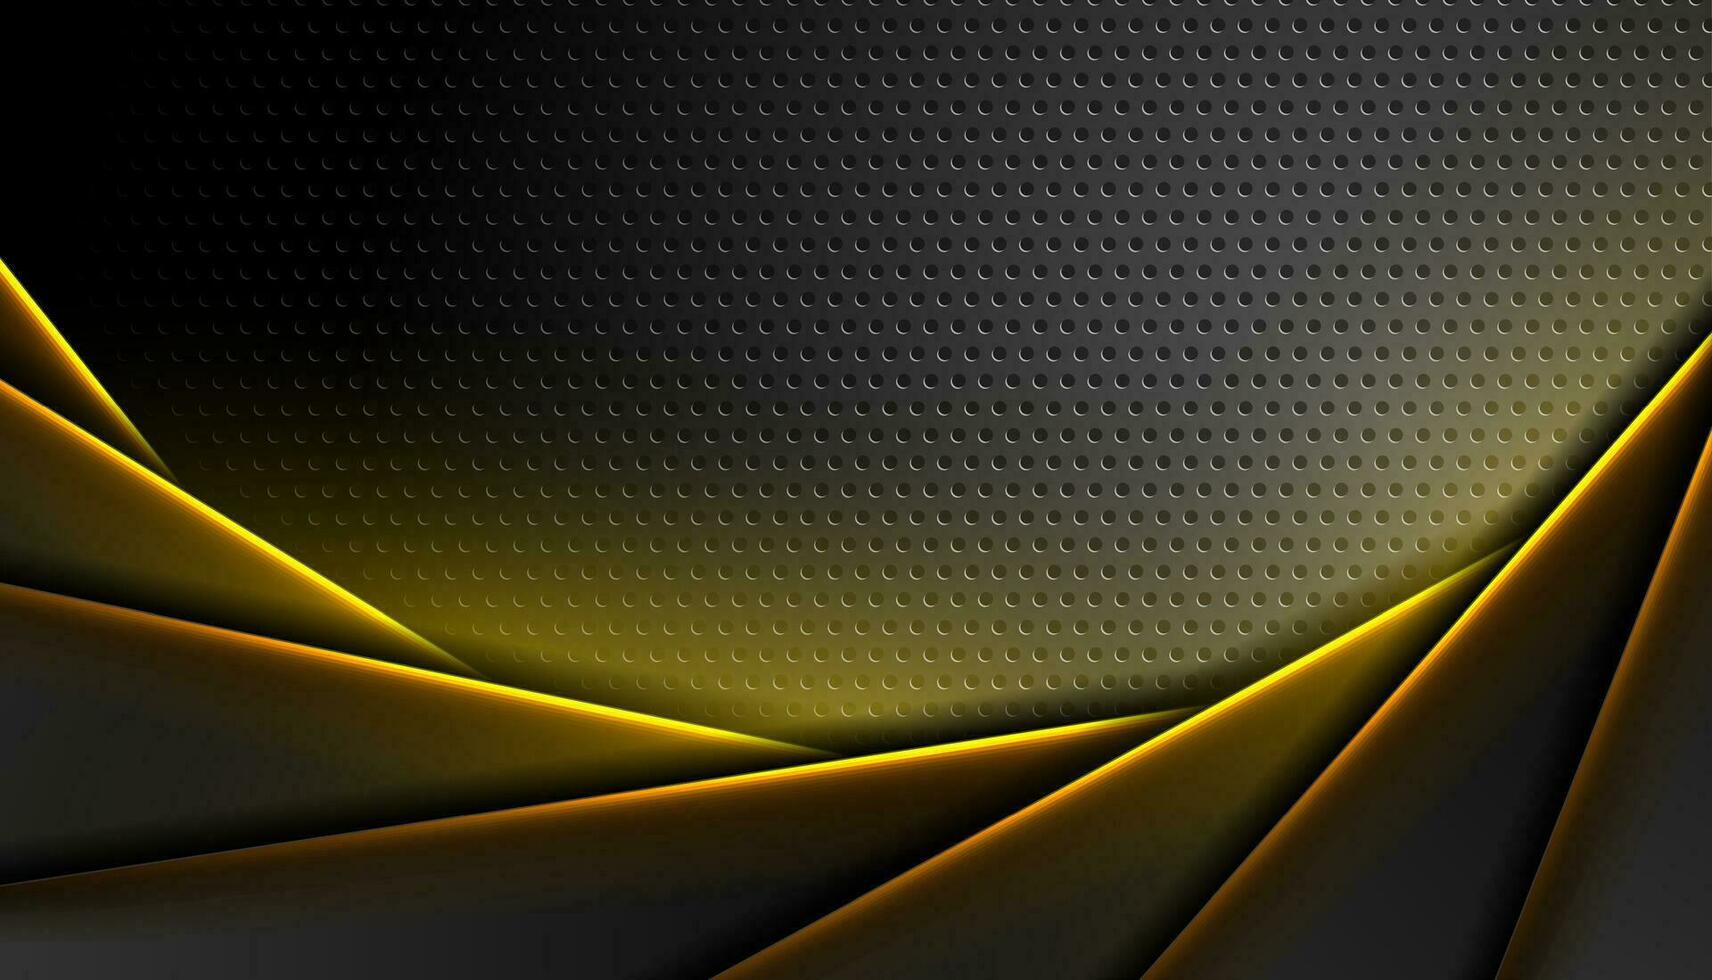 Futuristic technology abstract background with neon glowing lines vector